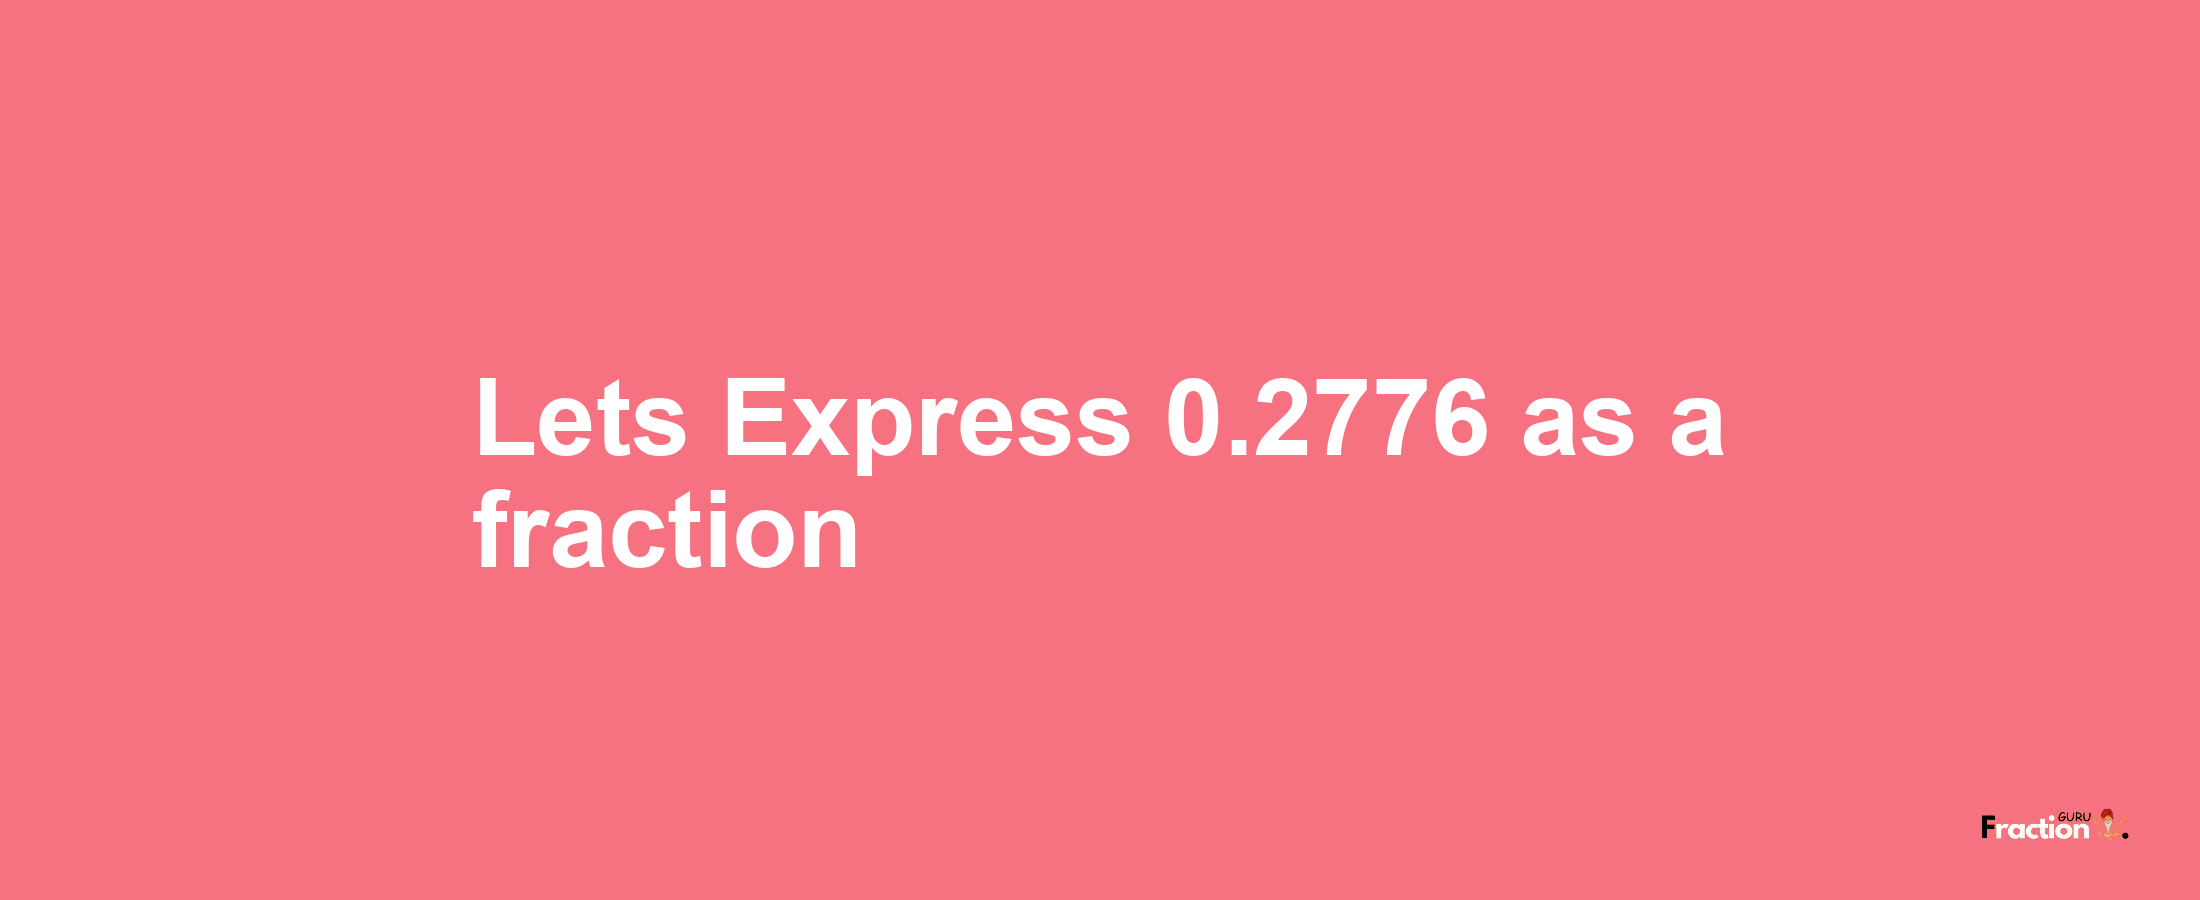 Lets Express 0.2776 as afraction